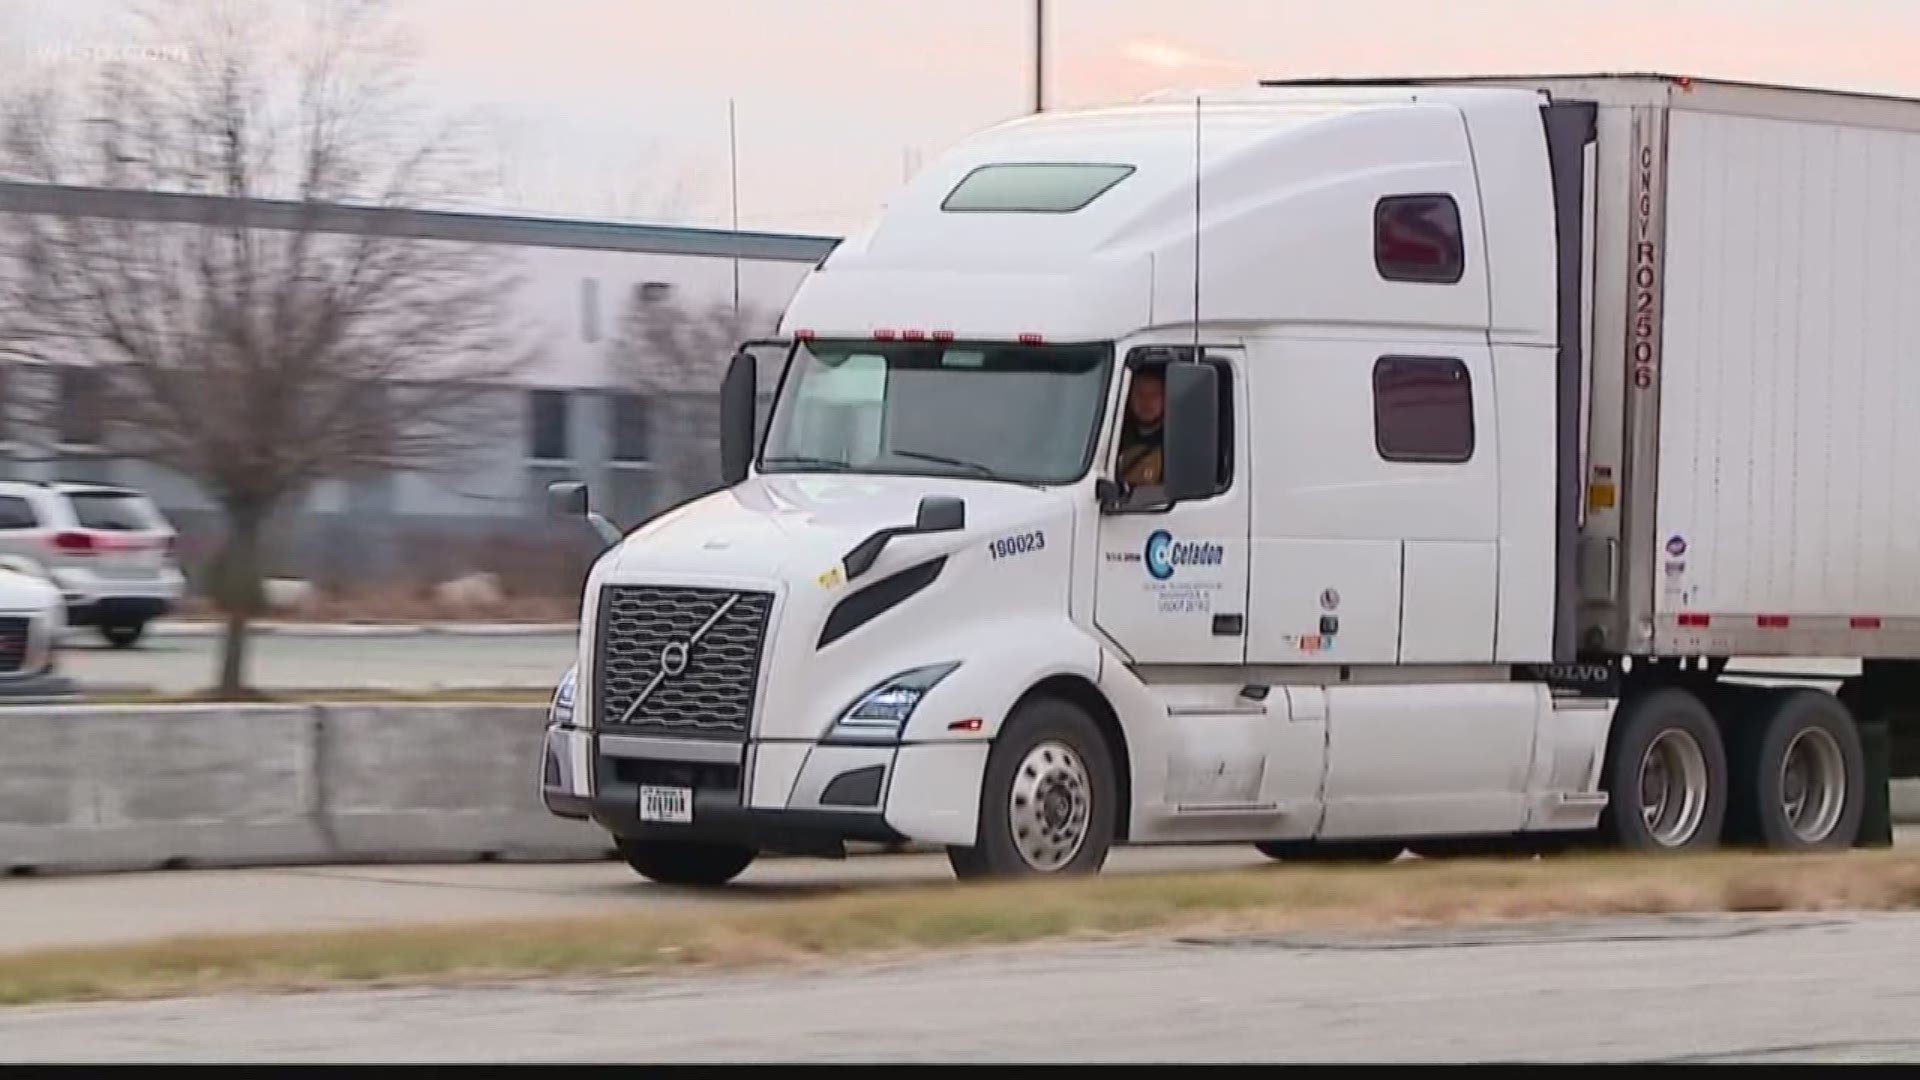 Their company gas cards stopped working – so they're stuck. 3,000 truckers are now unemployed.